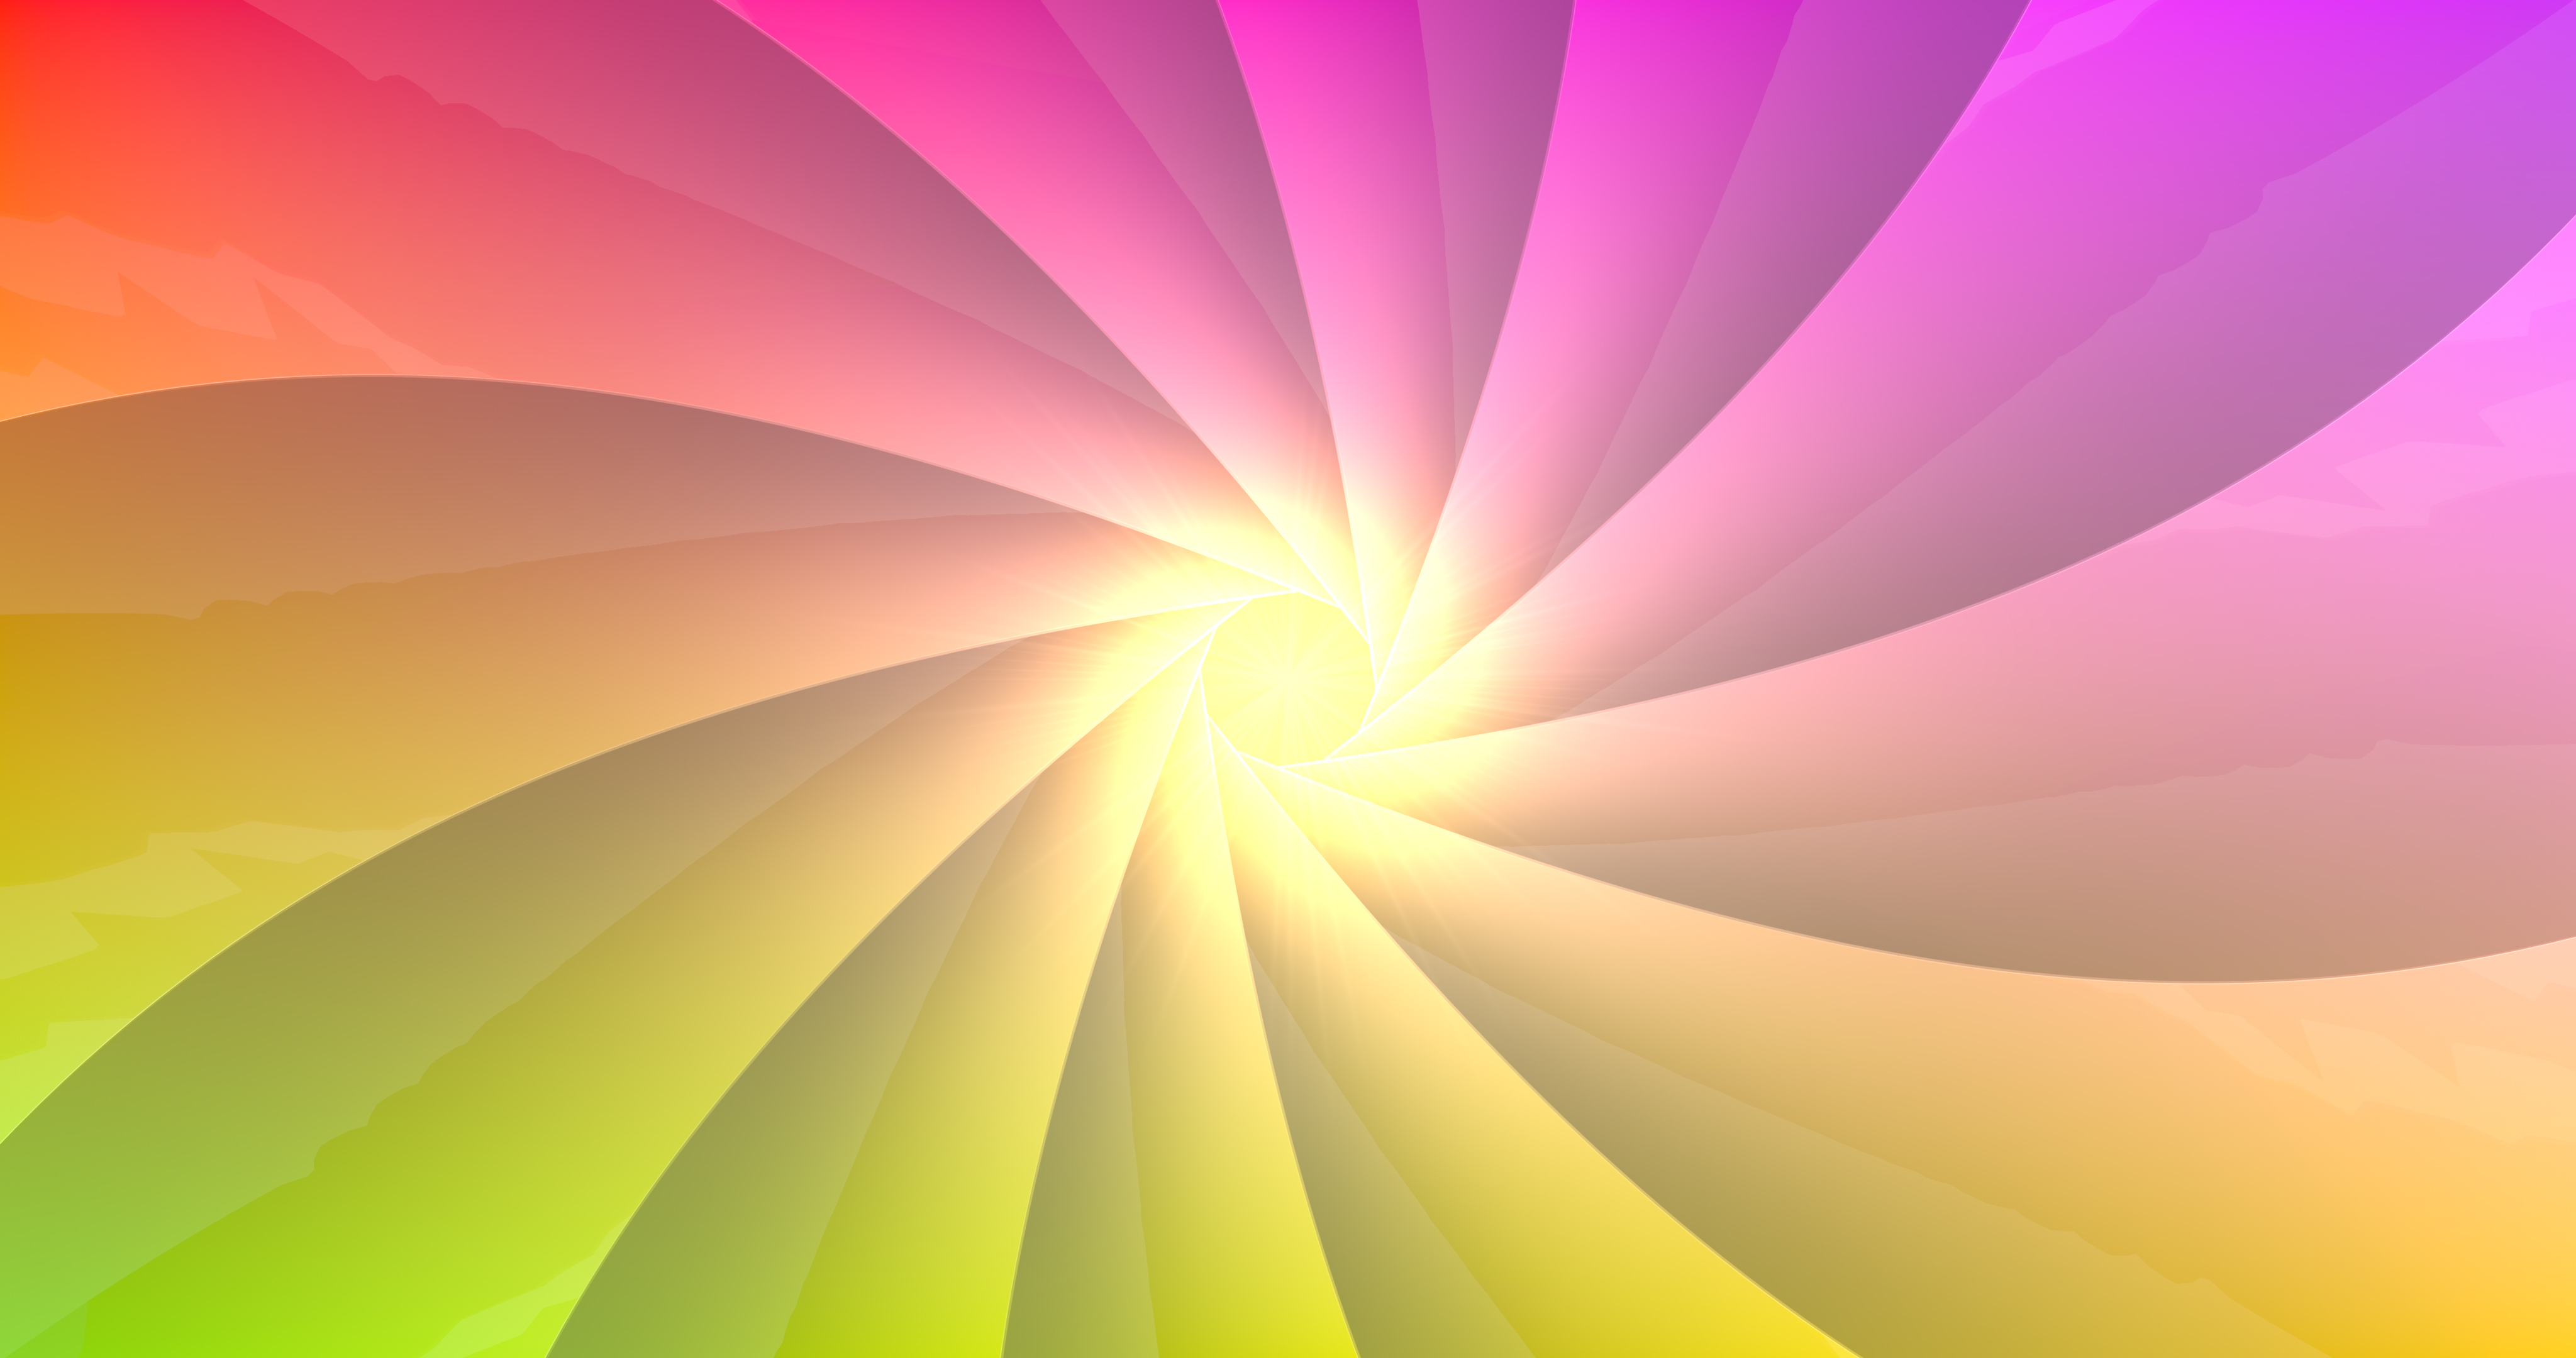 Vortex Winding Pink Yellow Turning Background Pictures